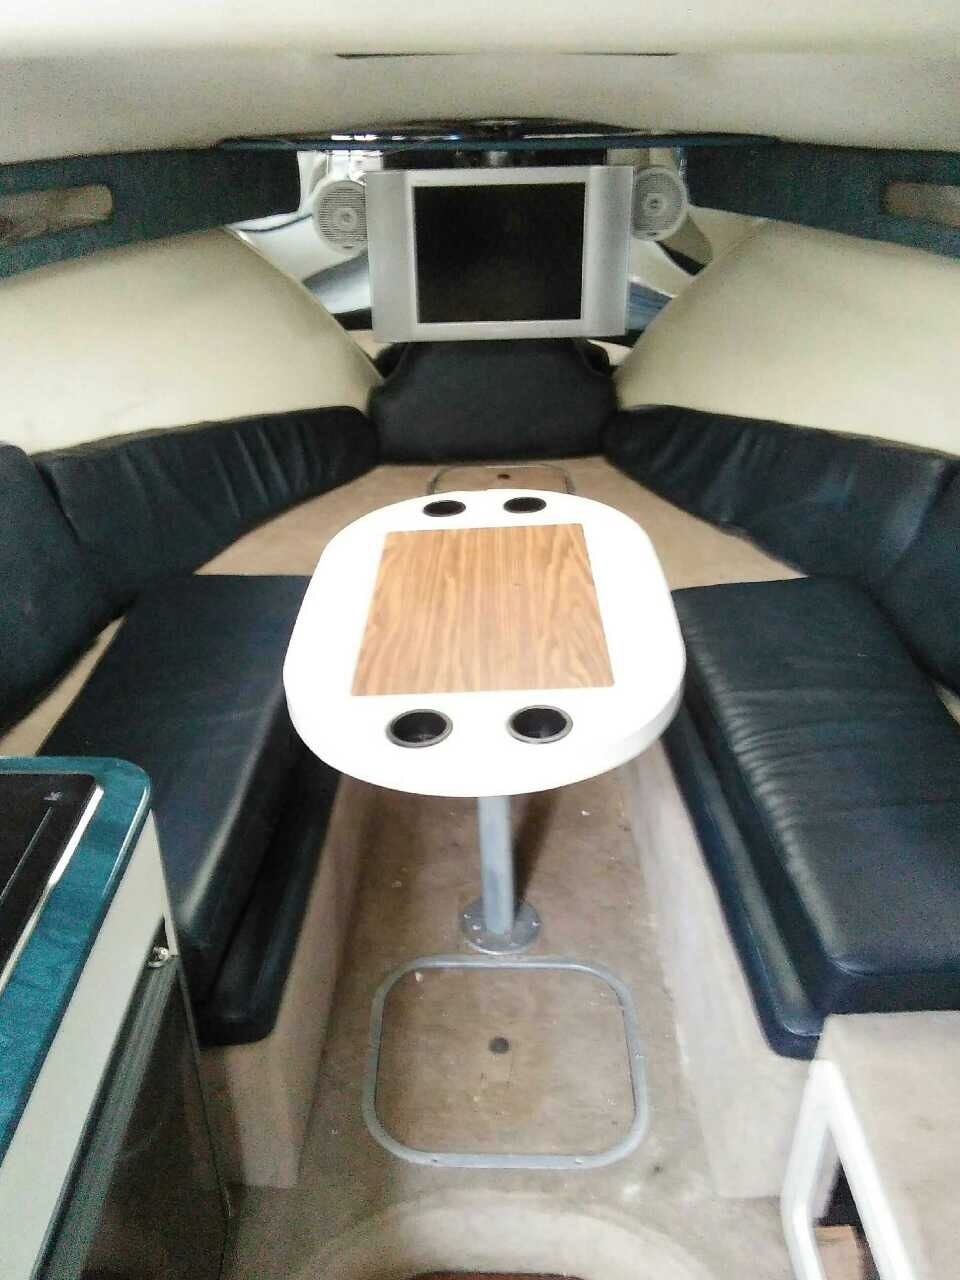 Crownline Cabin Crusier 1997 for sale for $6,000 - Boats ...